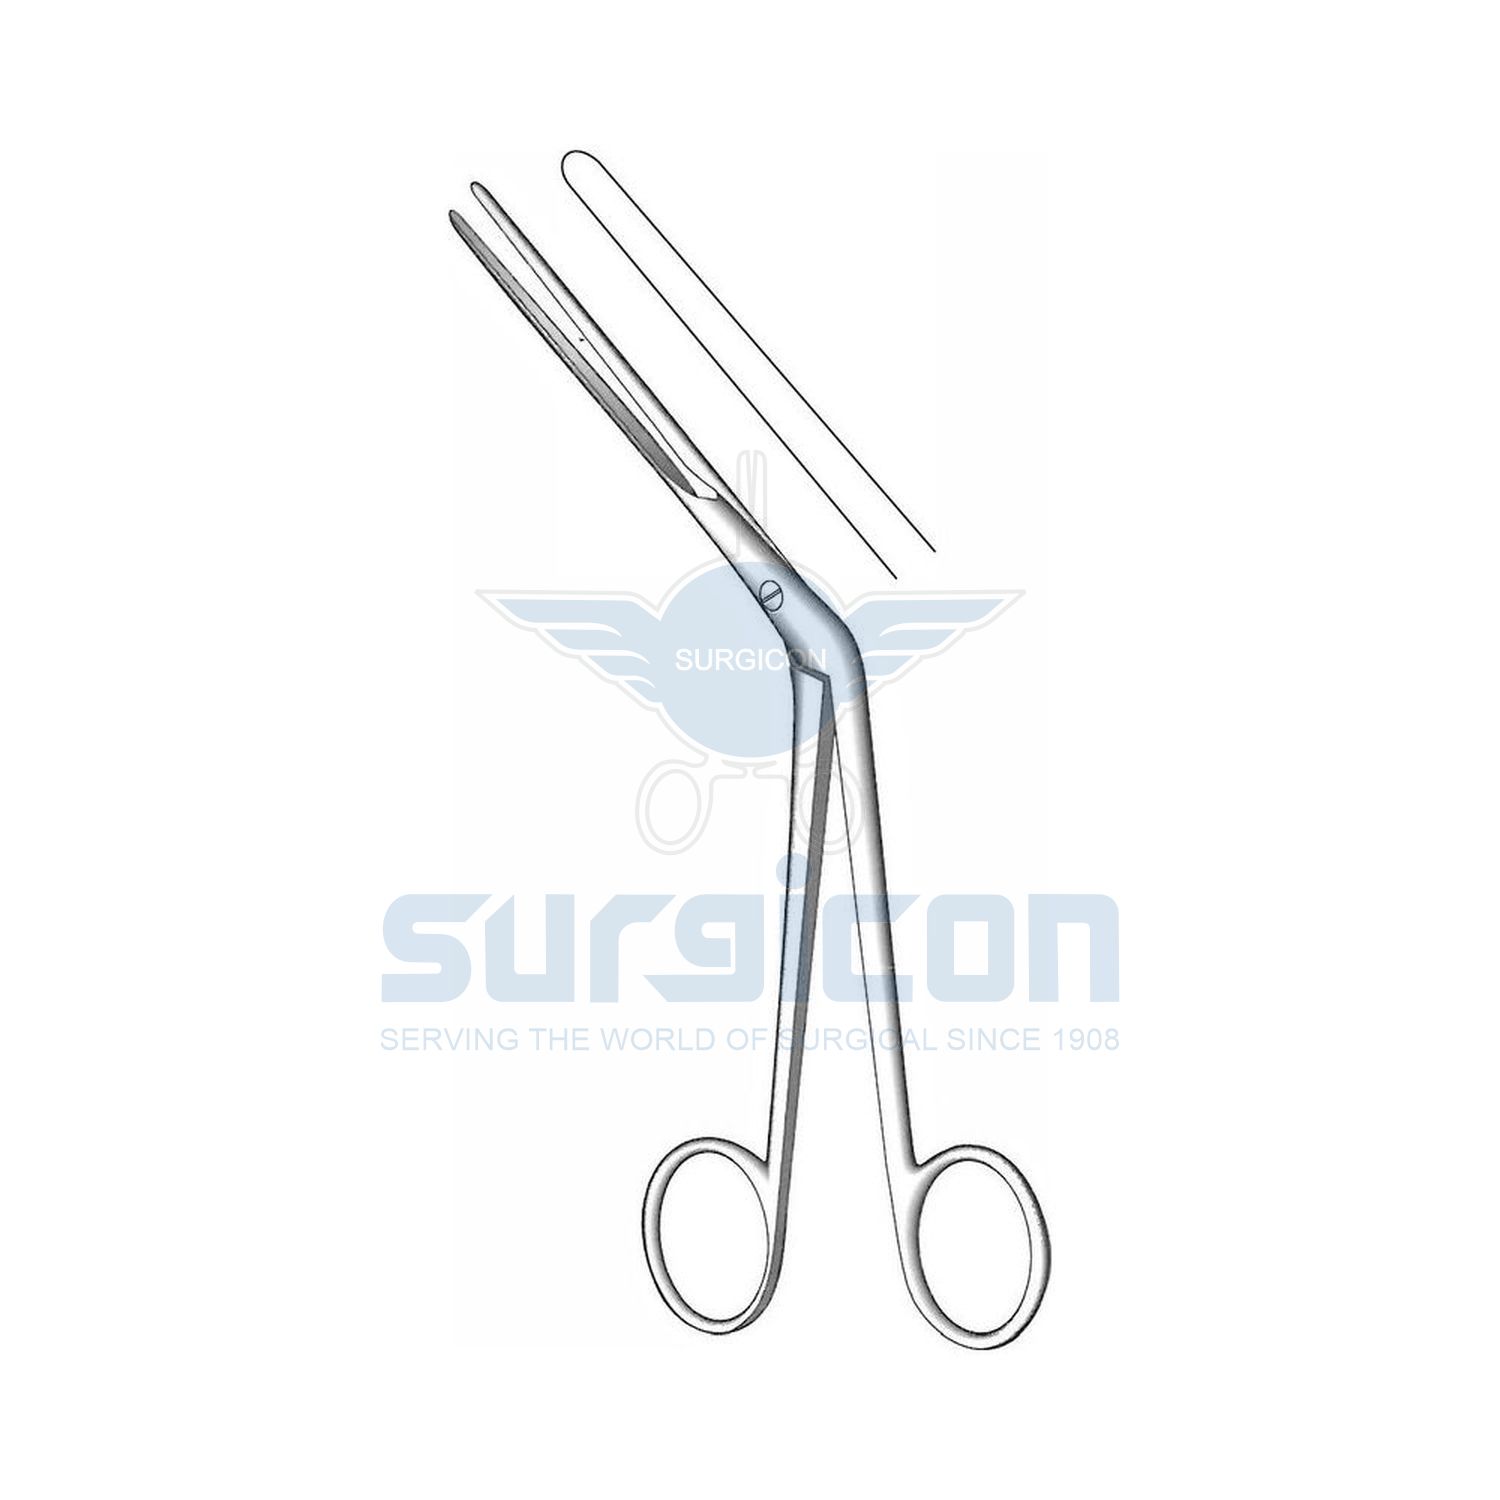 Lubet-Barbon-Polypus-And-Septum-Forcep-J-32-382